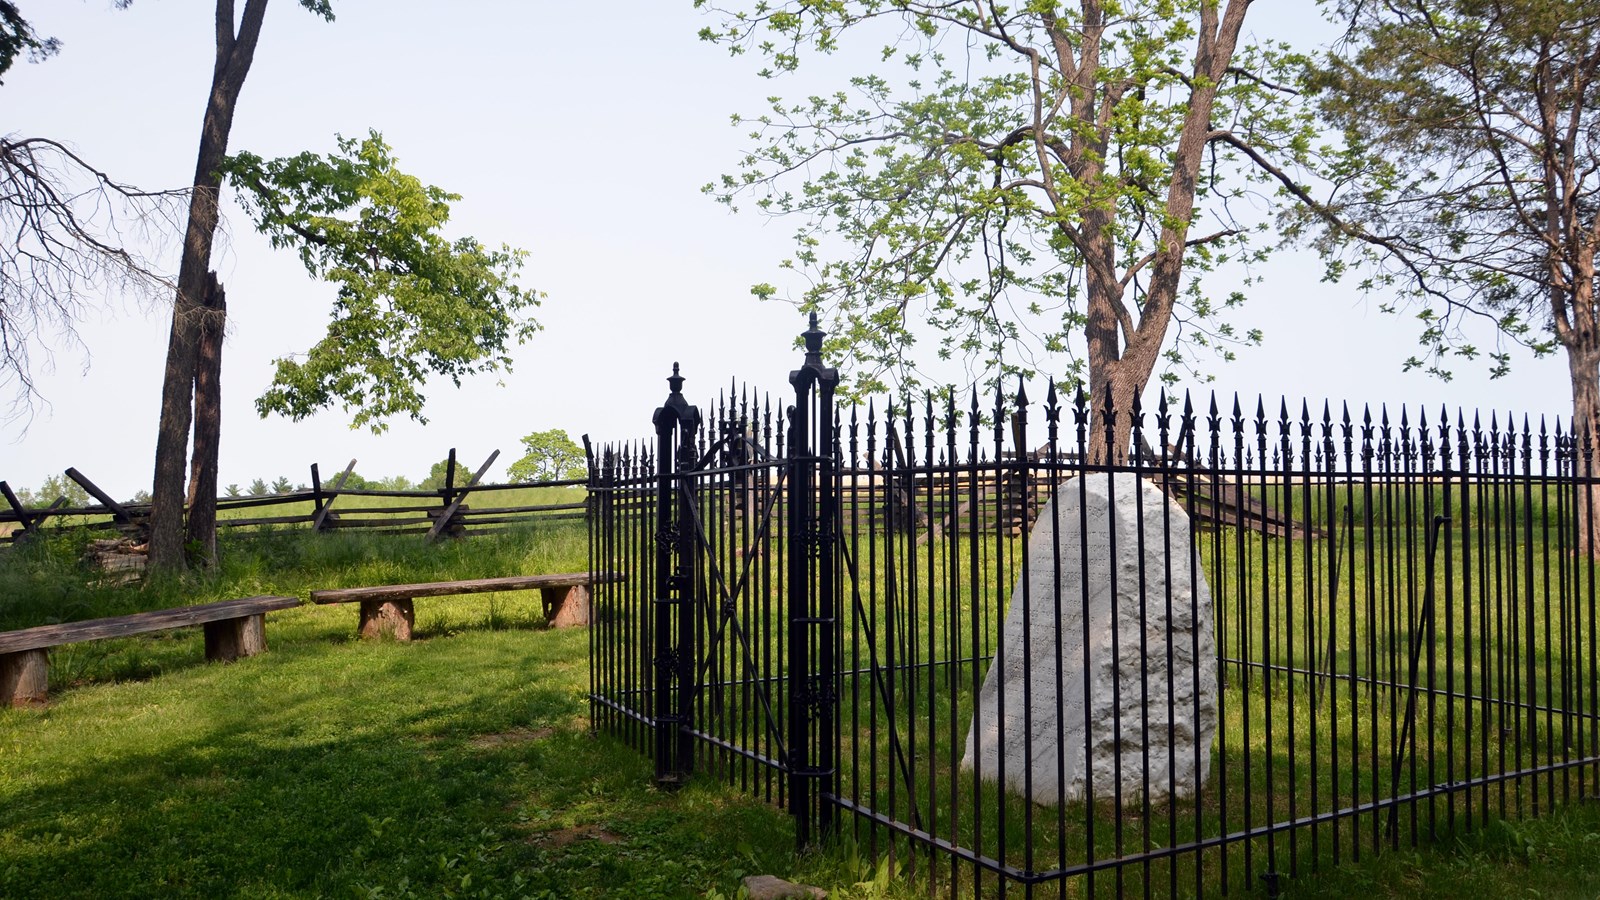 A gated iron fence encloses a marble war memorial in the woods at the edge of a field.